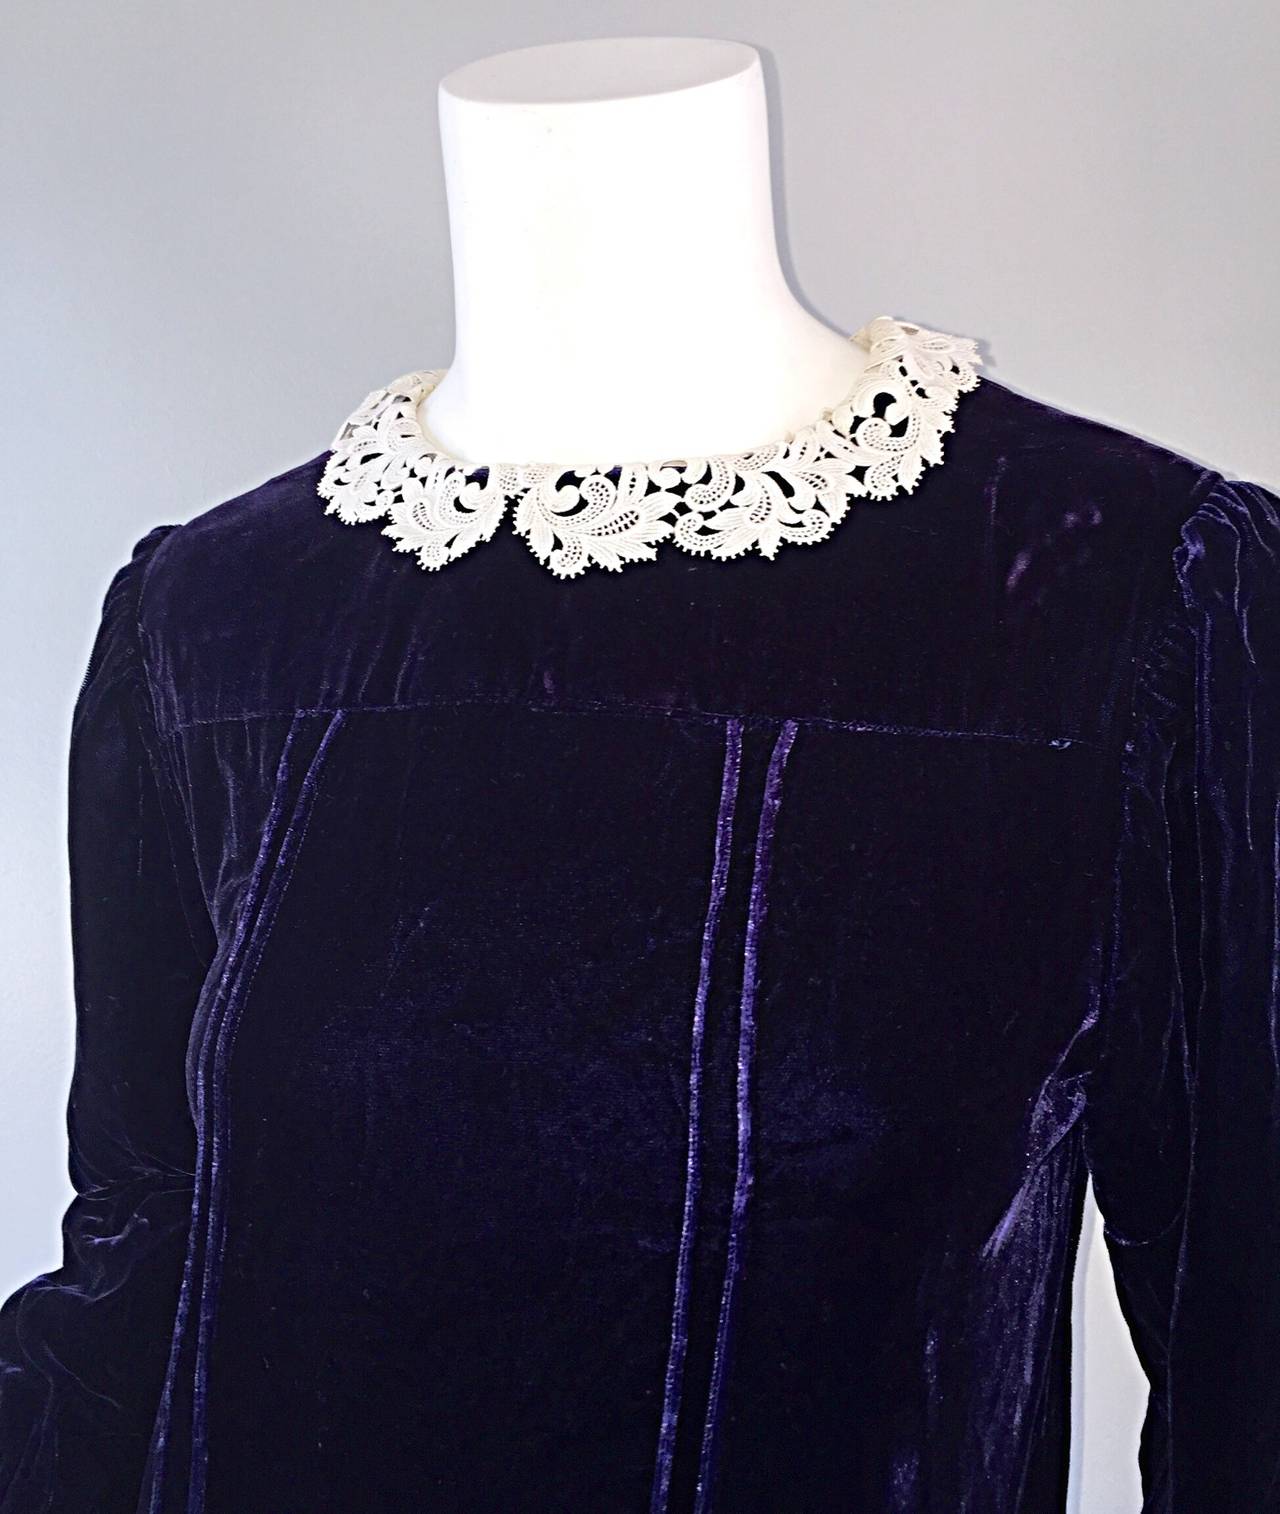 Chic AND rare 1920s regal dark purple / eggplant silk velvet flapper dress! Chic drop waist, with intricate folding and pleating detail. Buttons up the back, with two buttons at each cuff. Looks great on! Couture-like craftmanship, with heavy